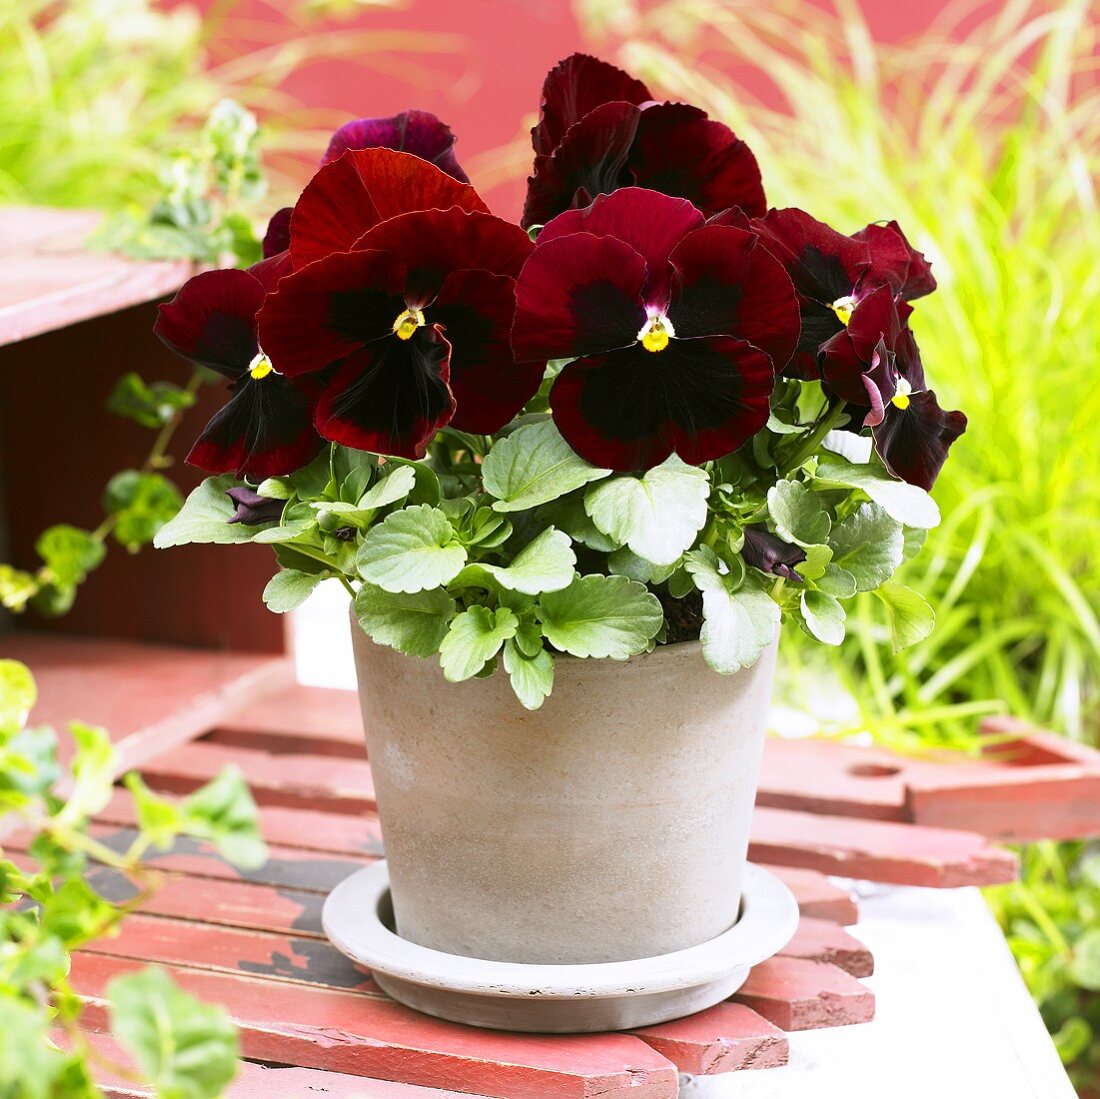 Pansy 'Goliath Red with Blotch' in flowerpot